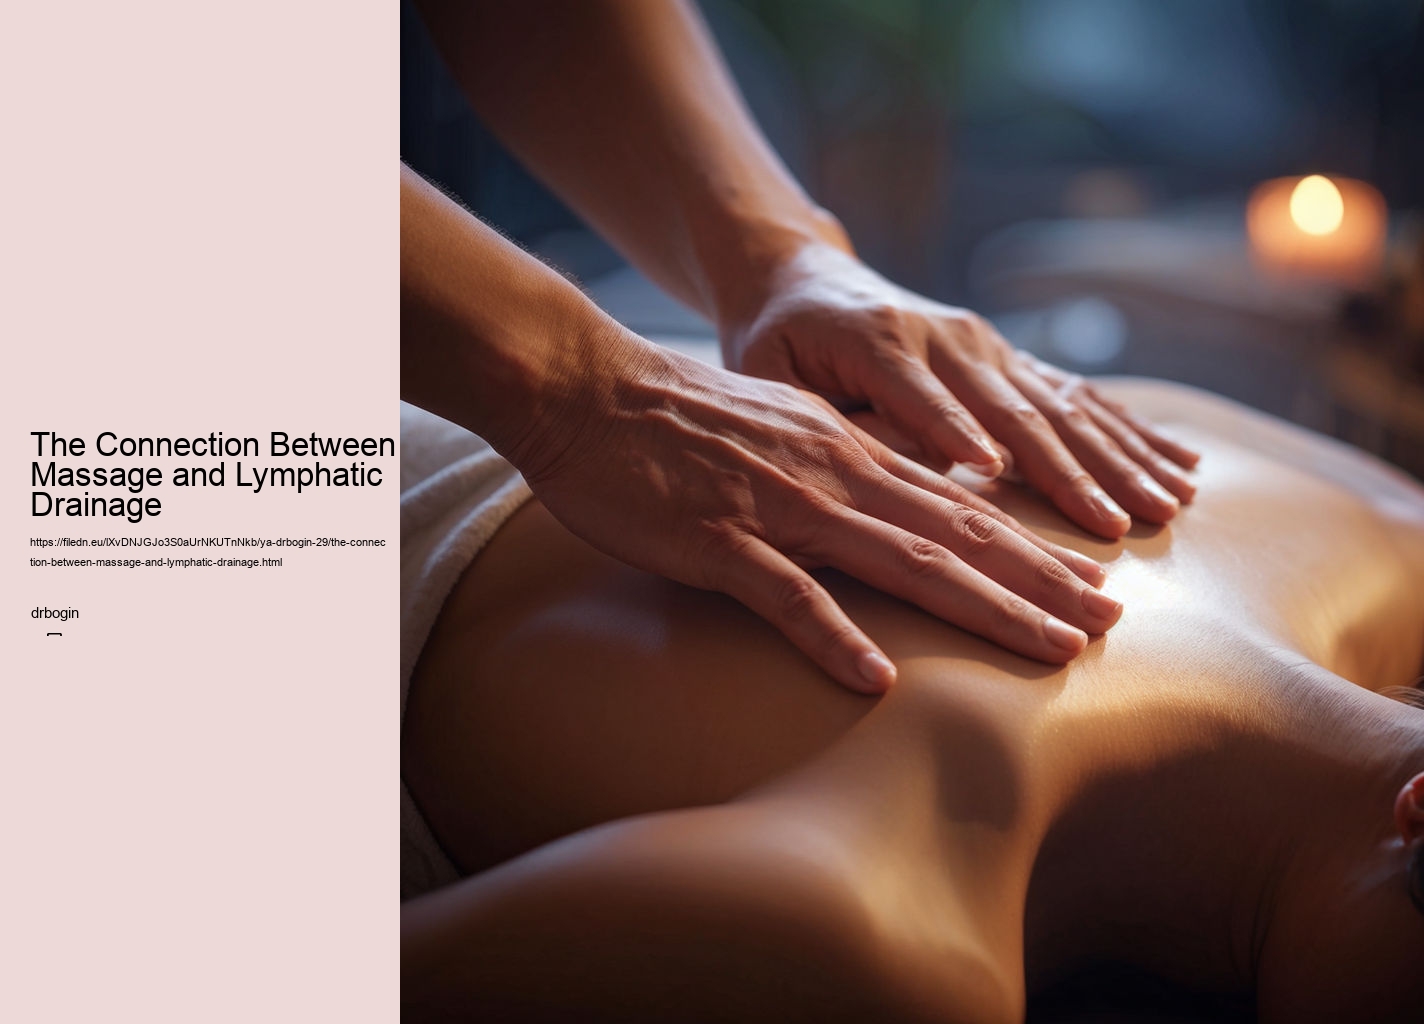 The Connection Between Massage and Lymphatic Drainage